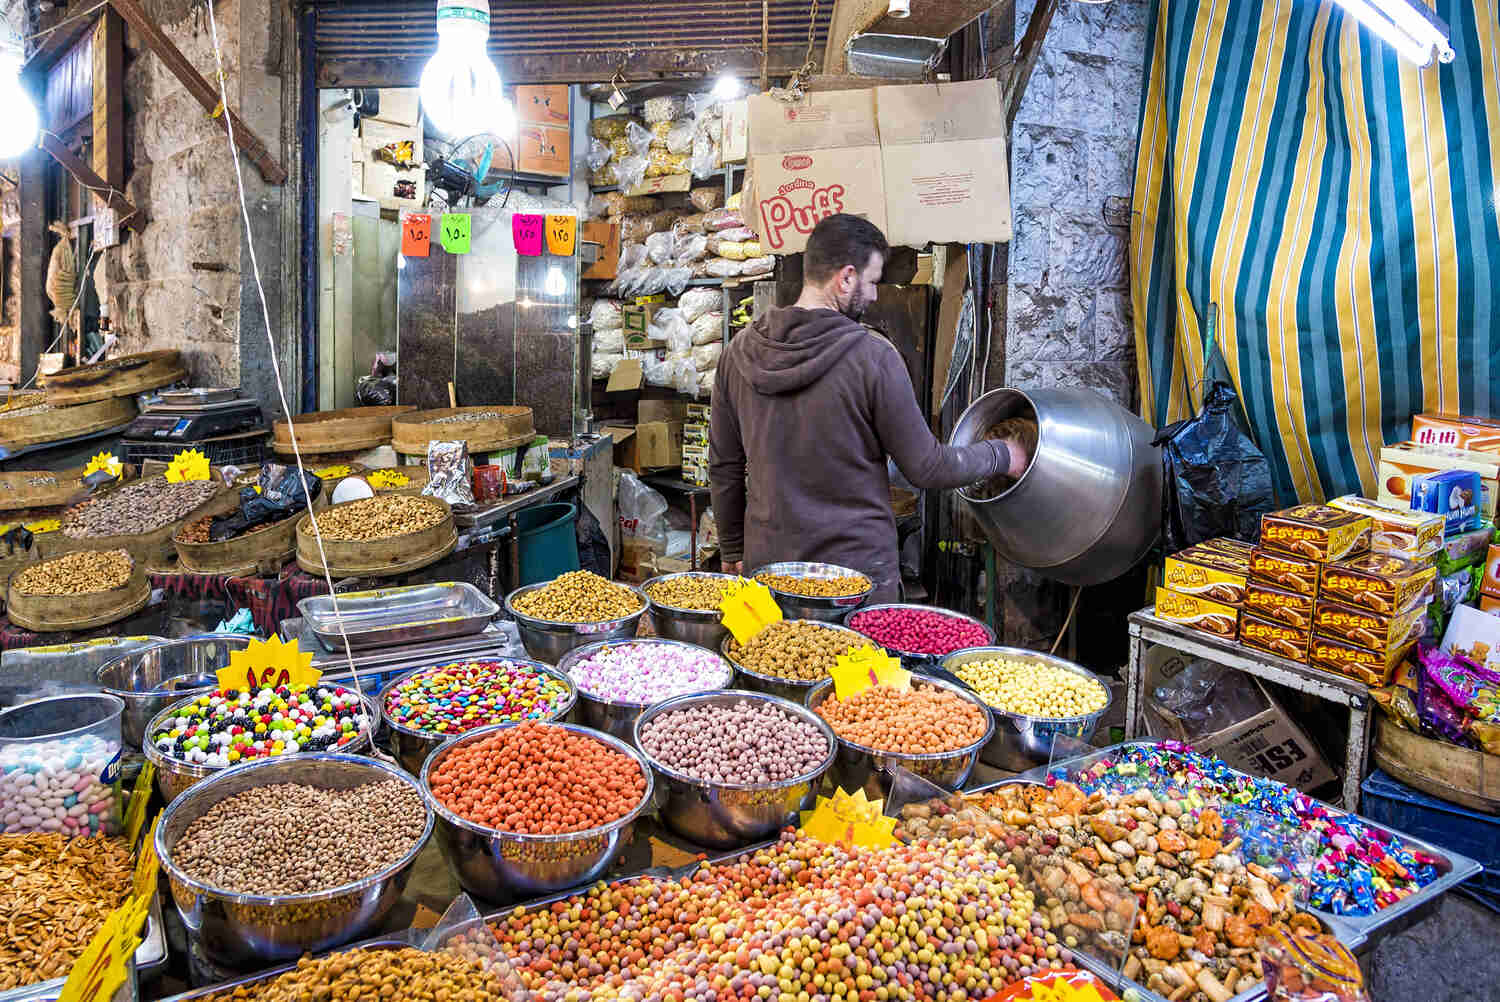 Man working amidst a vibrant spice market.